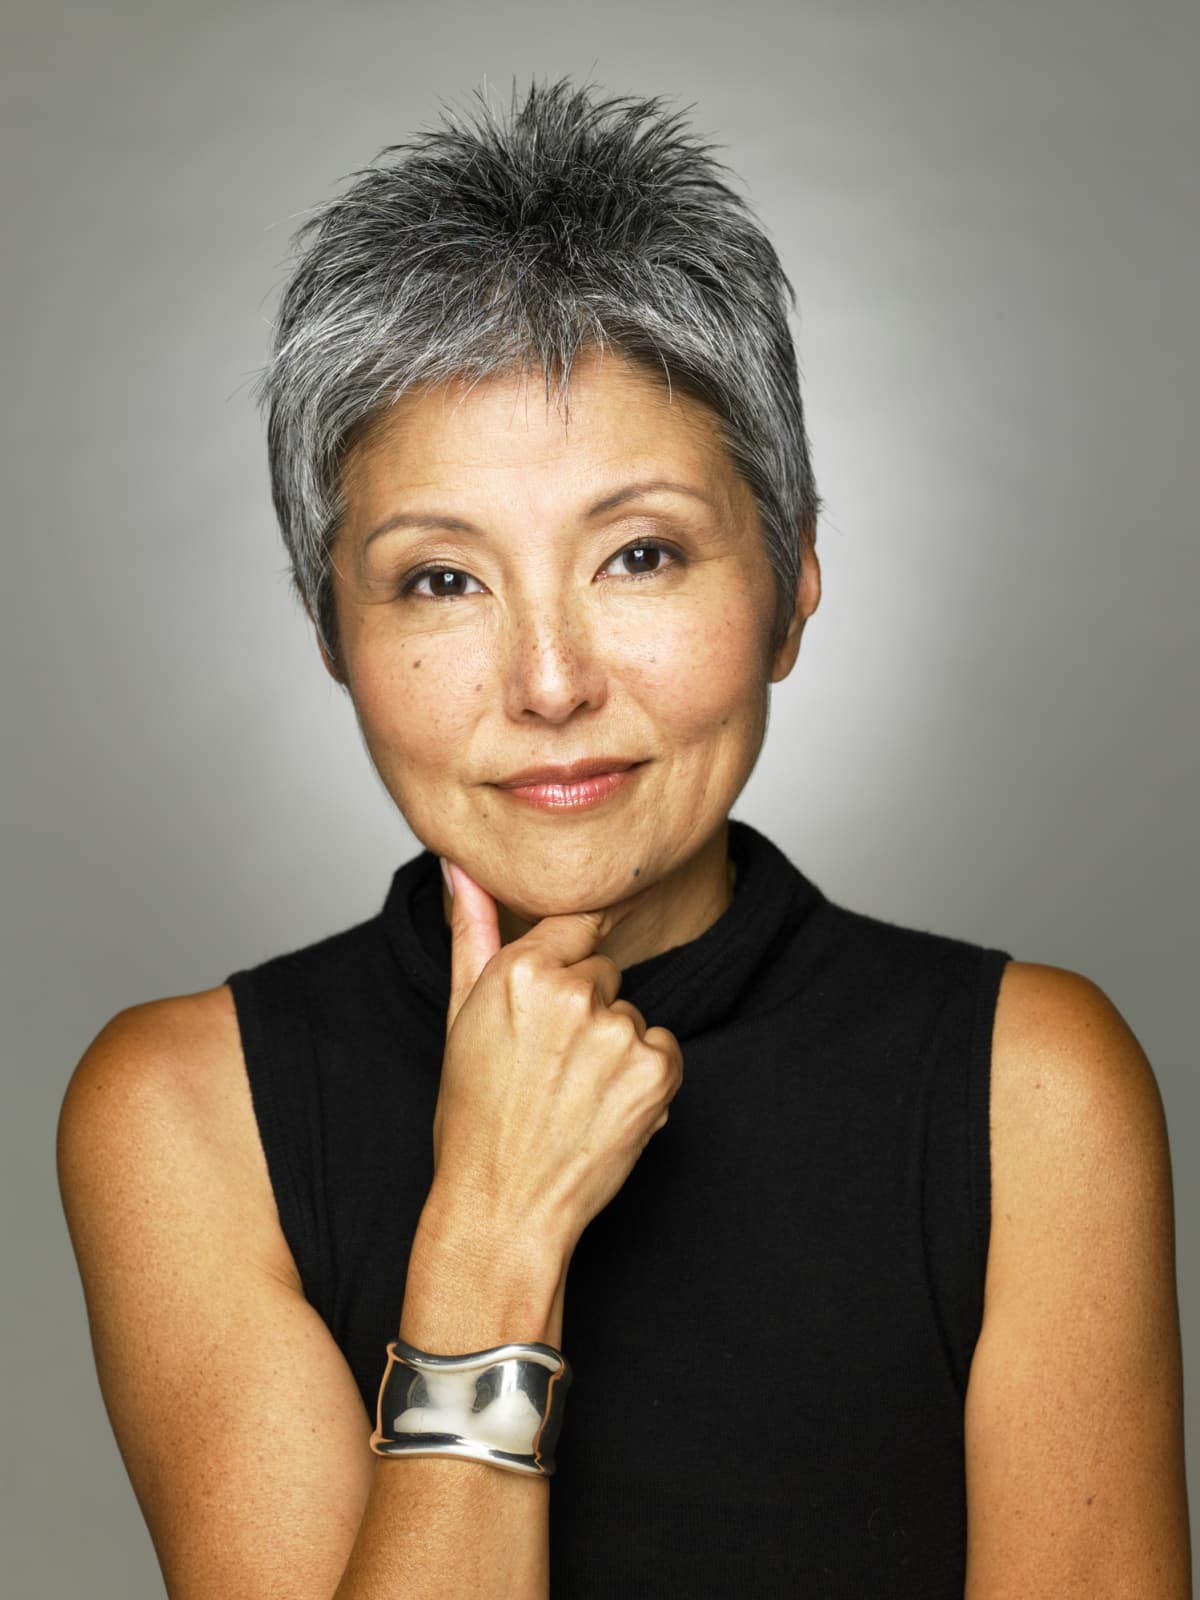 Woman with short, gray, pixie haircut